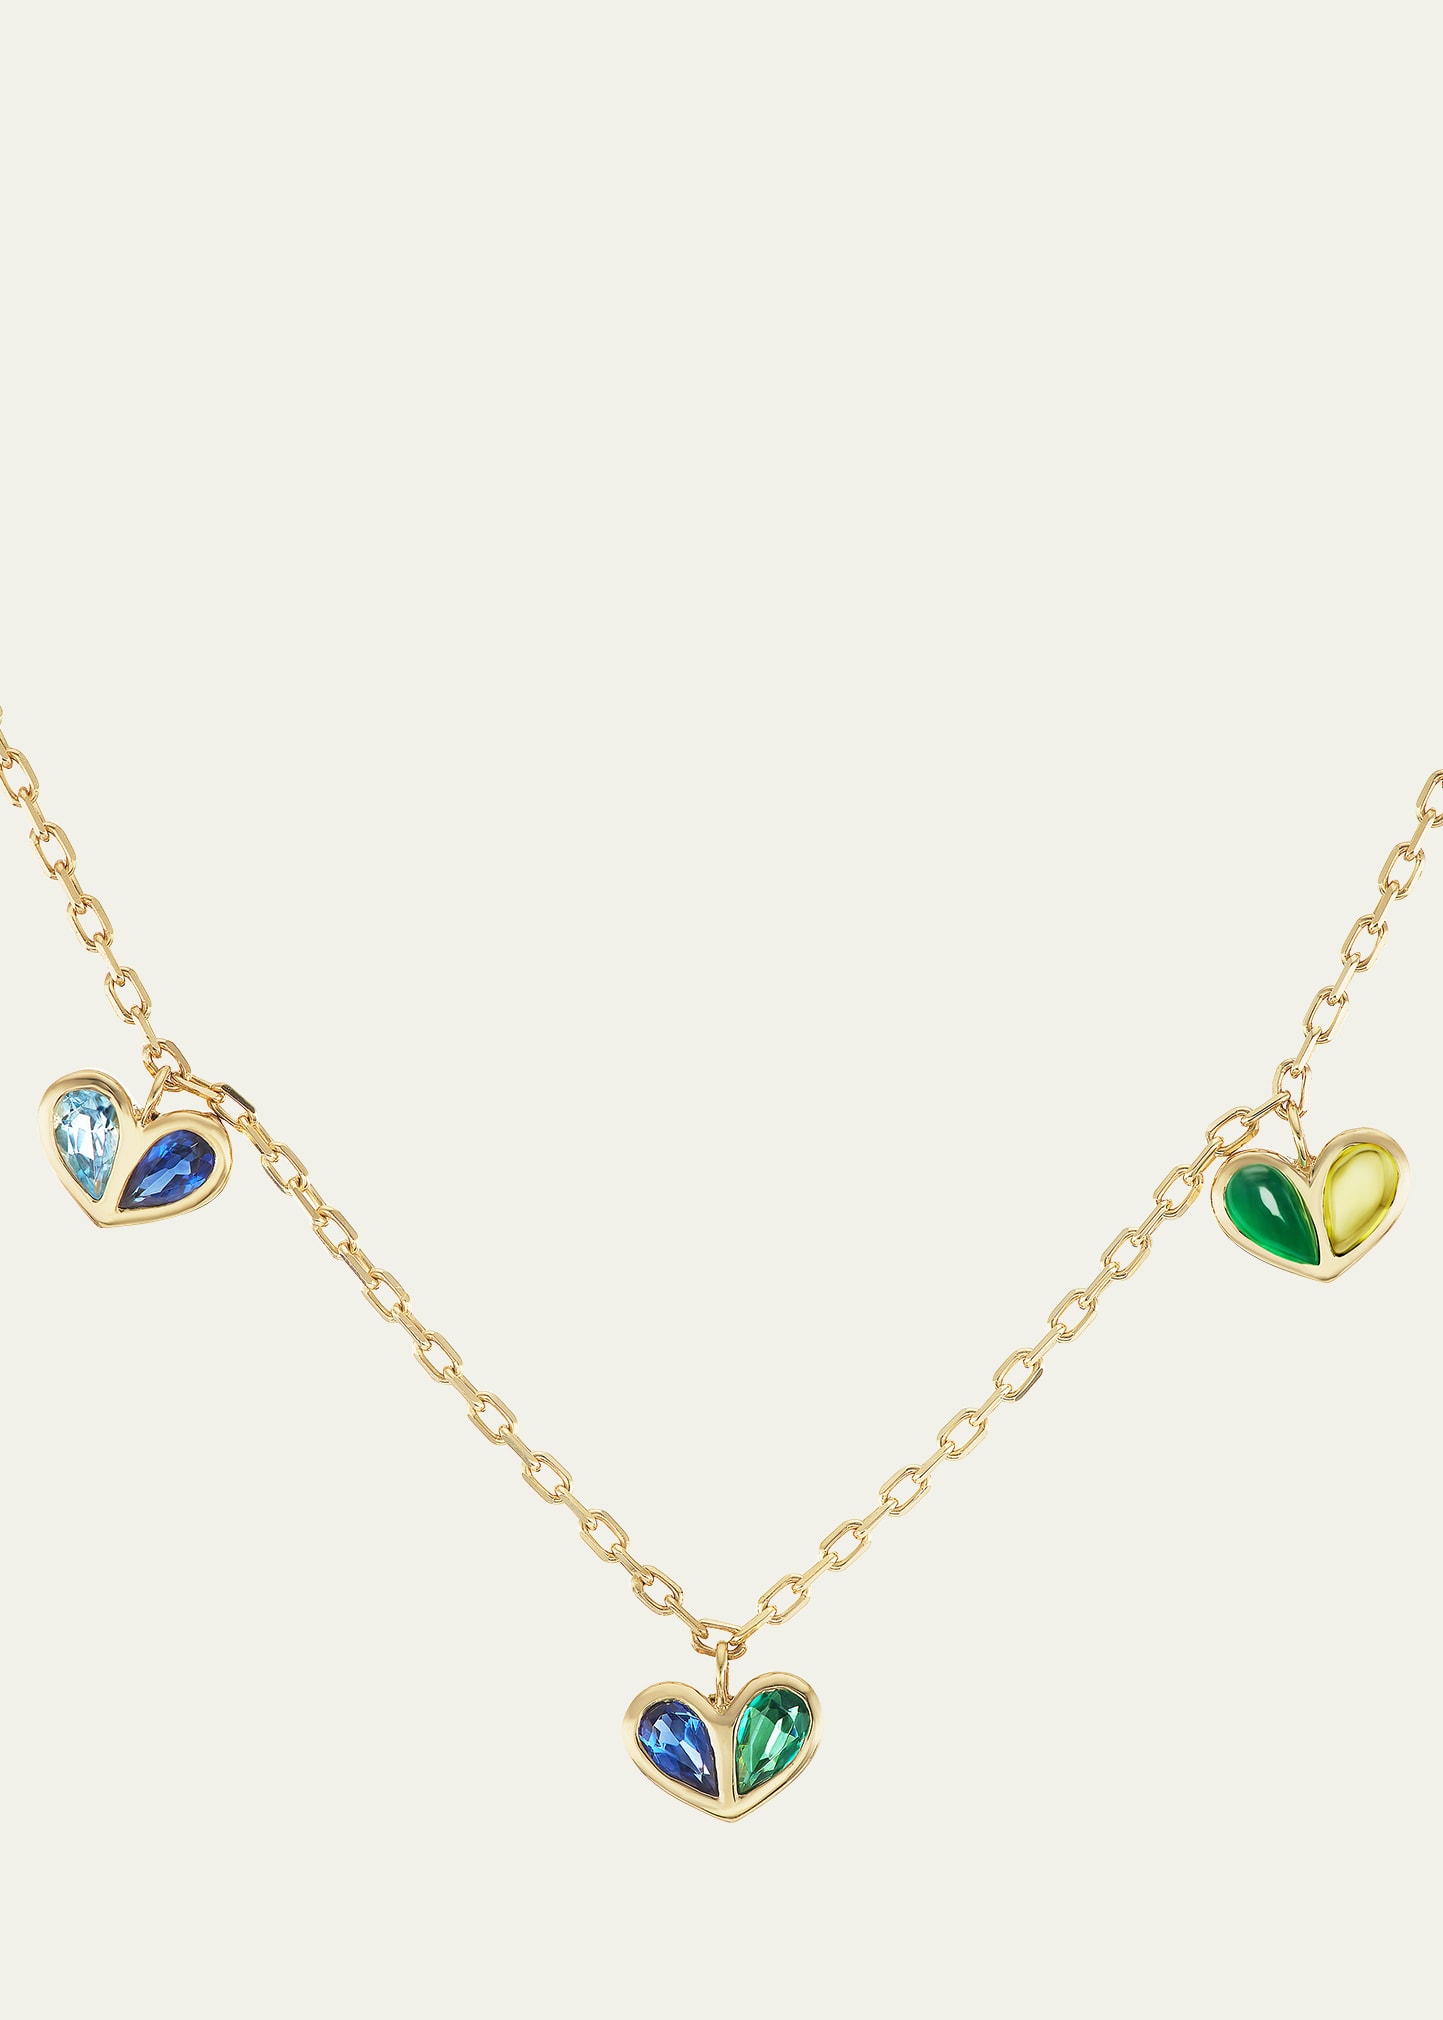 Yellow Gold Sweetheart Necklace with Aquamarine, Blue Sapphire, Emerald and Peridot